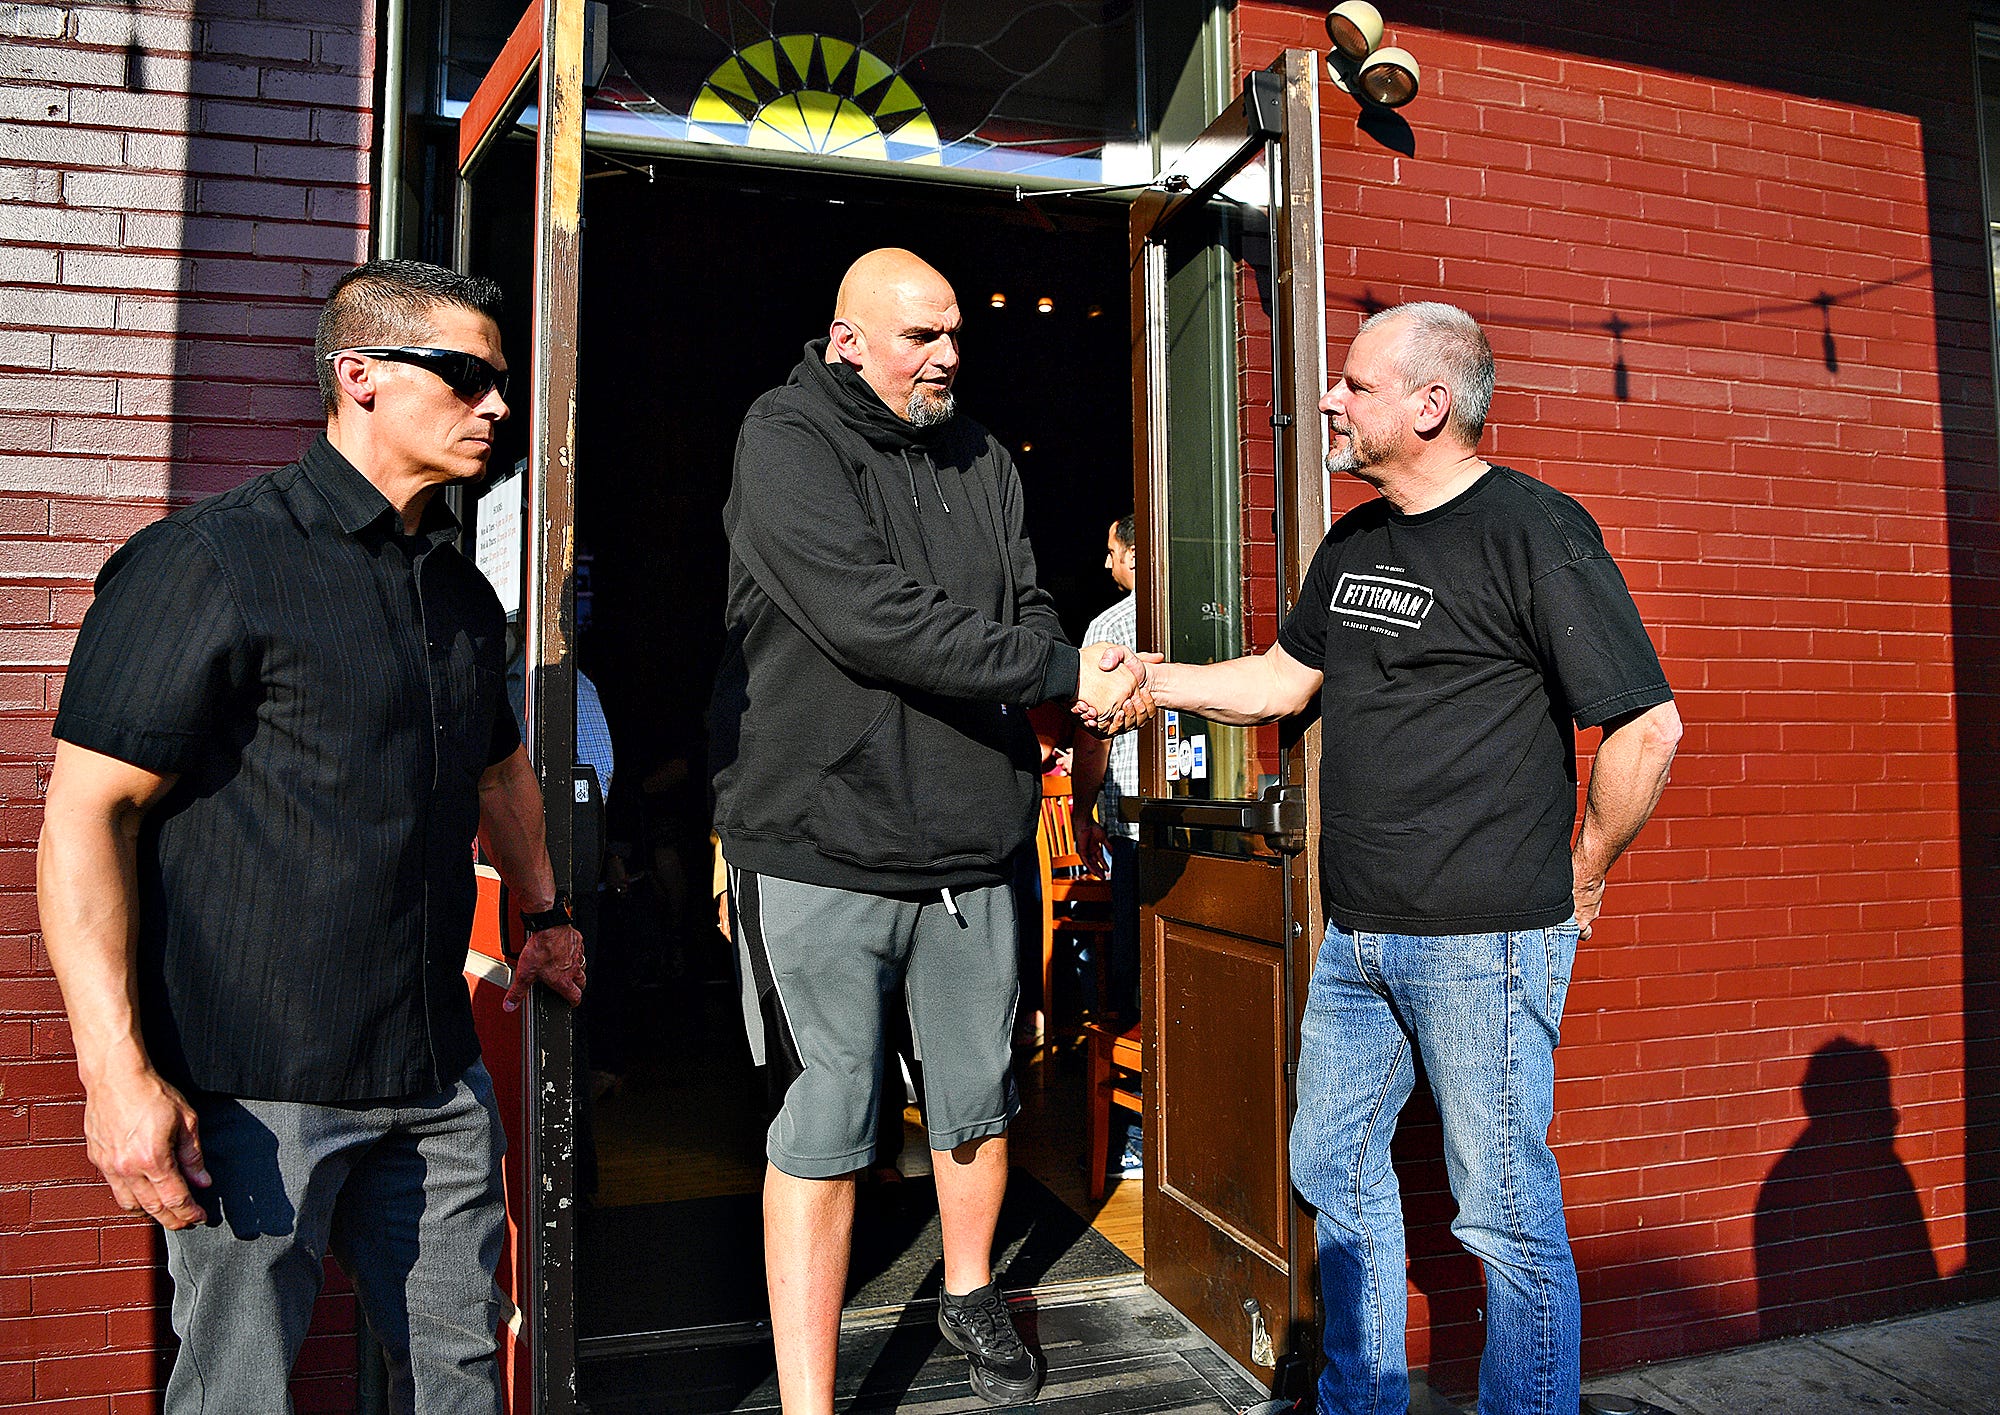 Lt. Gov. John Fetterman campaigns for U.S. Senate at Holy Hound Taproom in York City, Thursday, May 12, 2022. Dawn J. Sagert photo